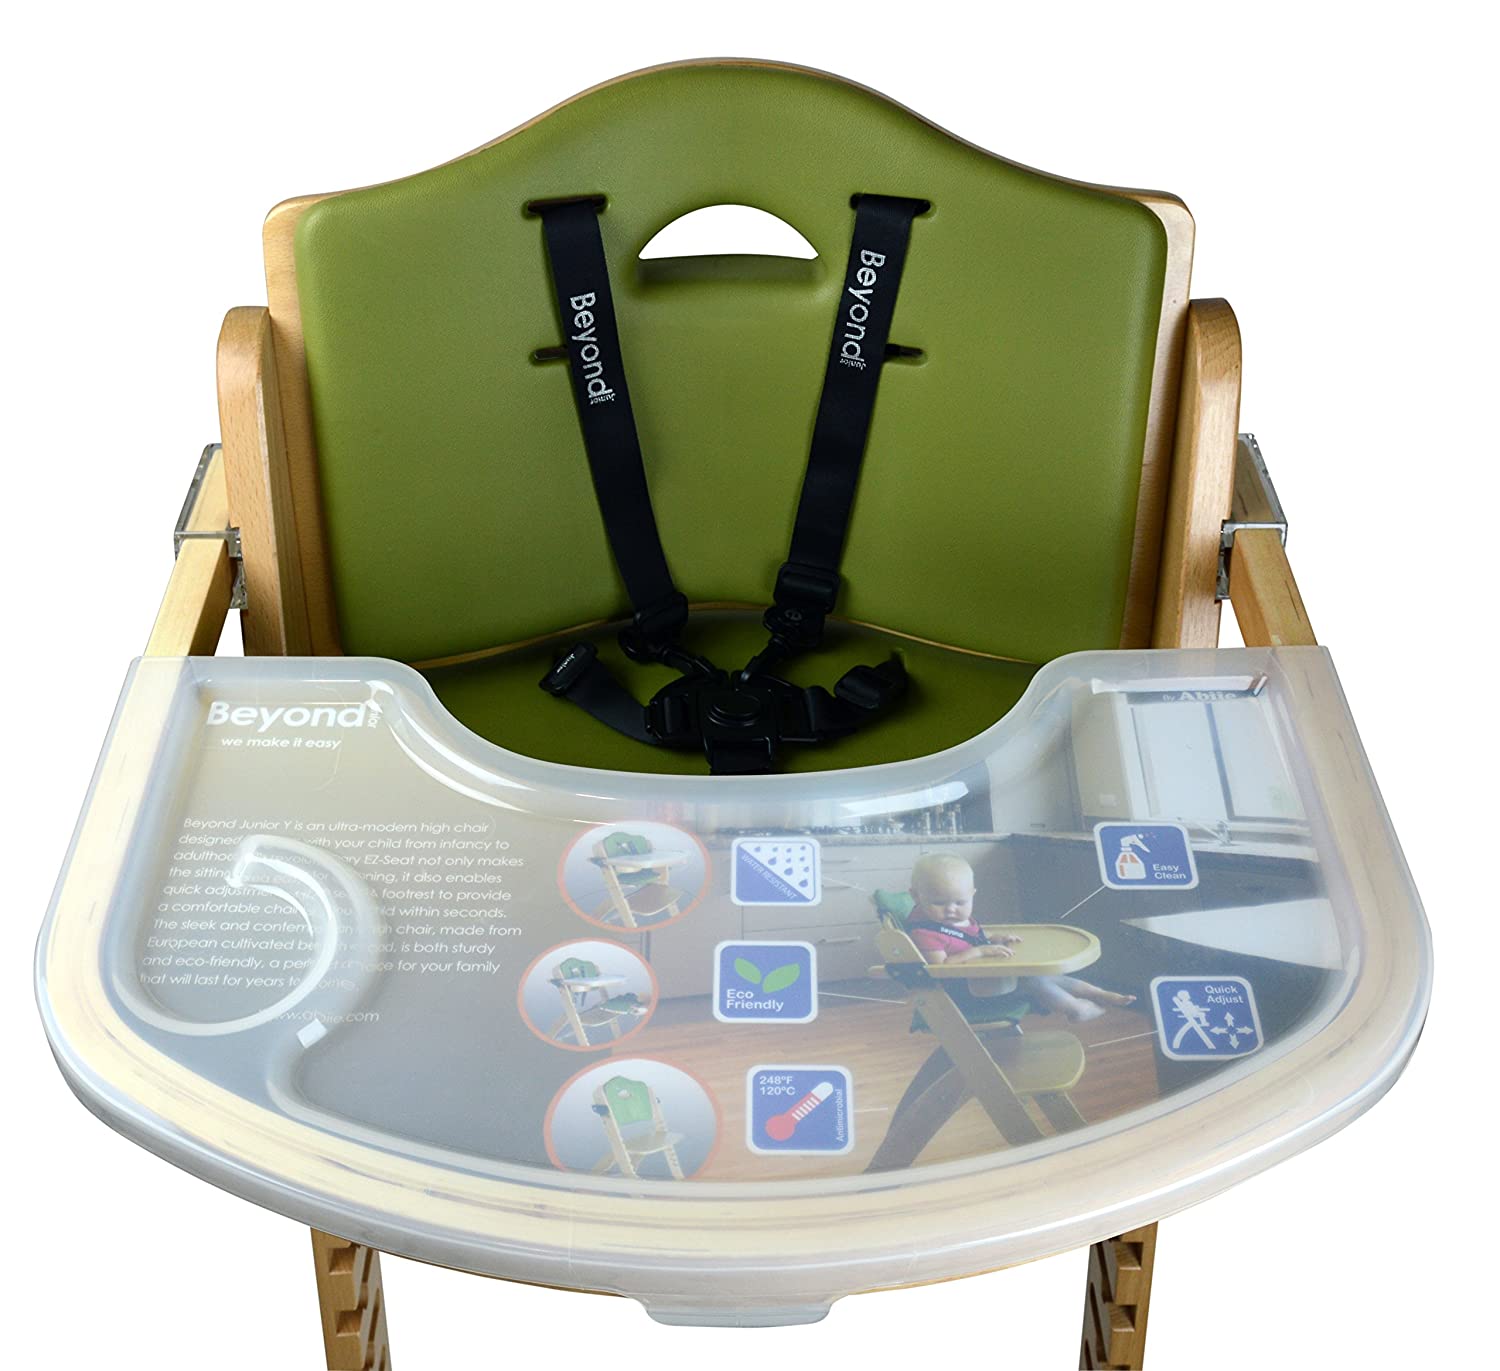 Abiie Beyond Wooden High Chair with Tray. The Perfect Seating Highchair